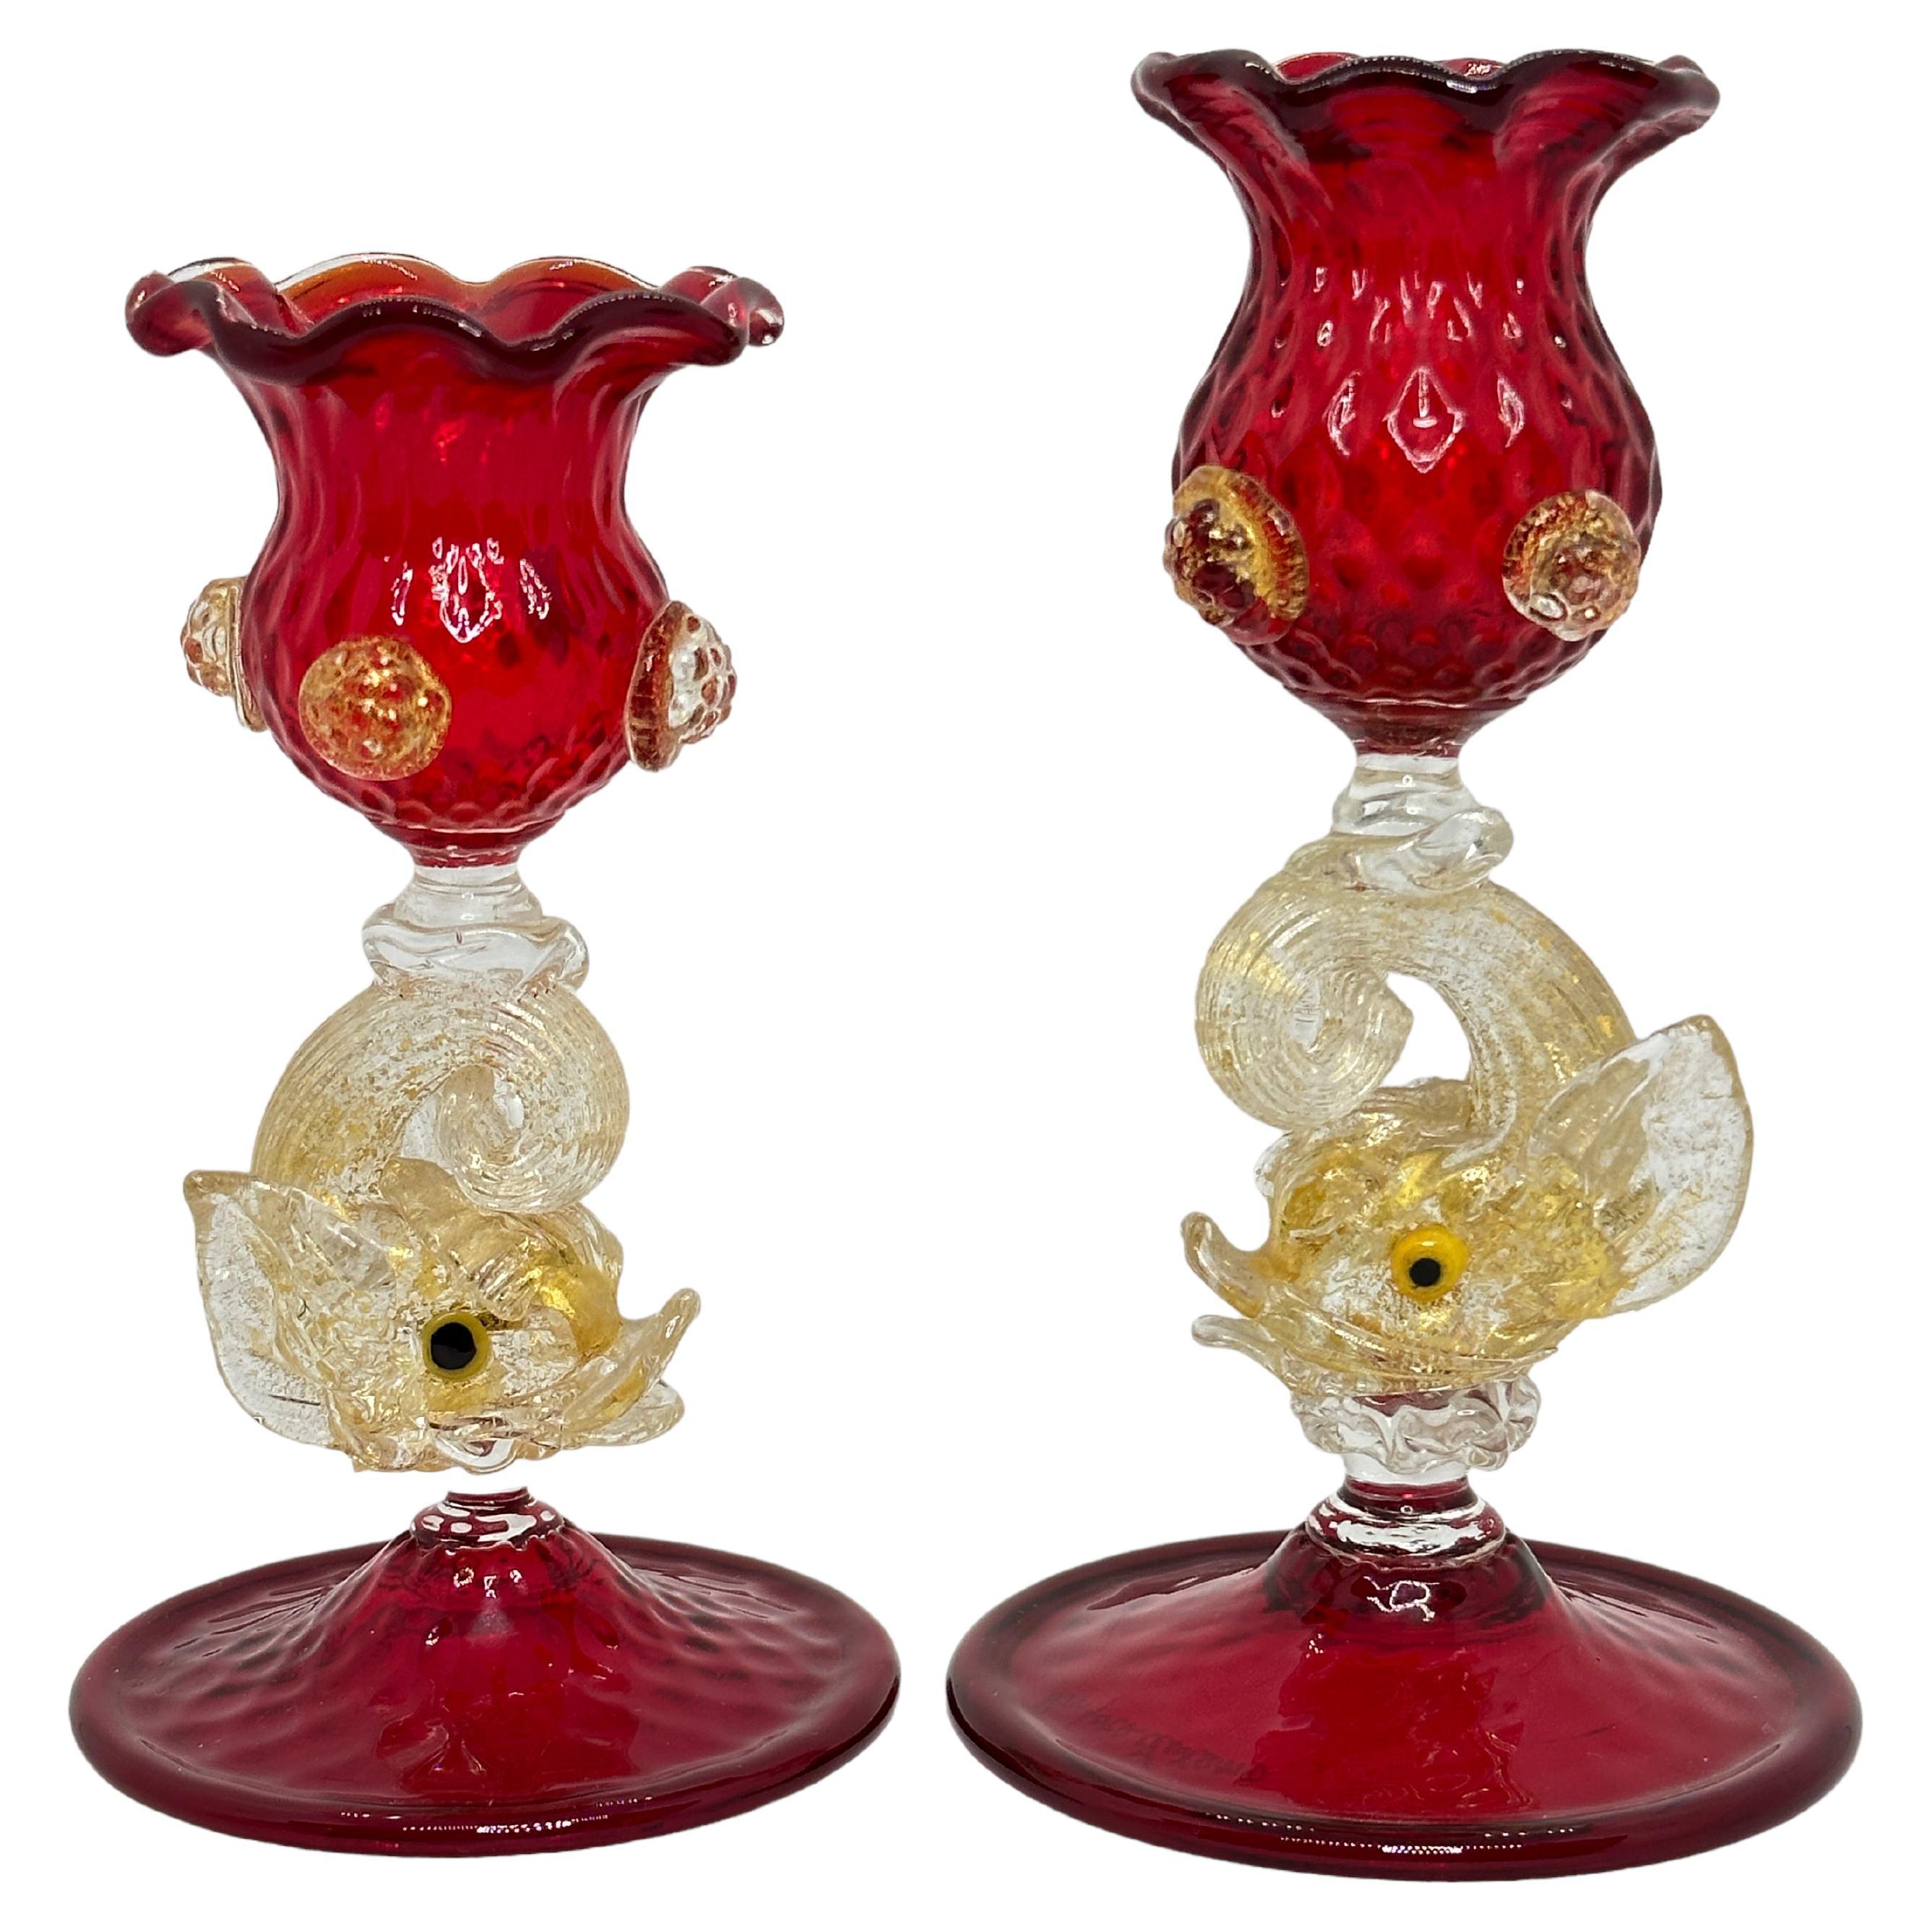 Murano Venetian Glass Salviati Ruby Red Dolphin Candlesticks Candle Holders